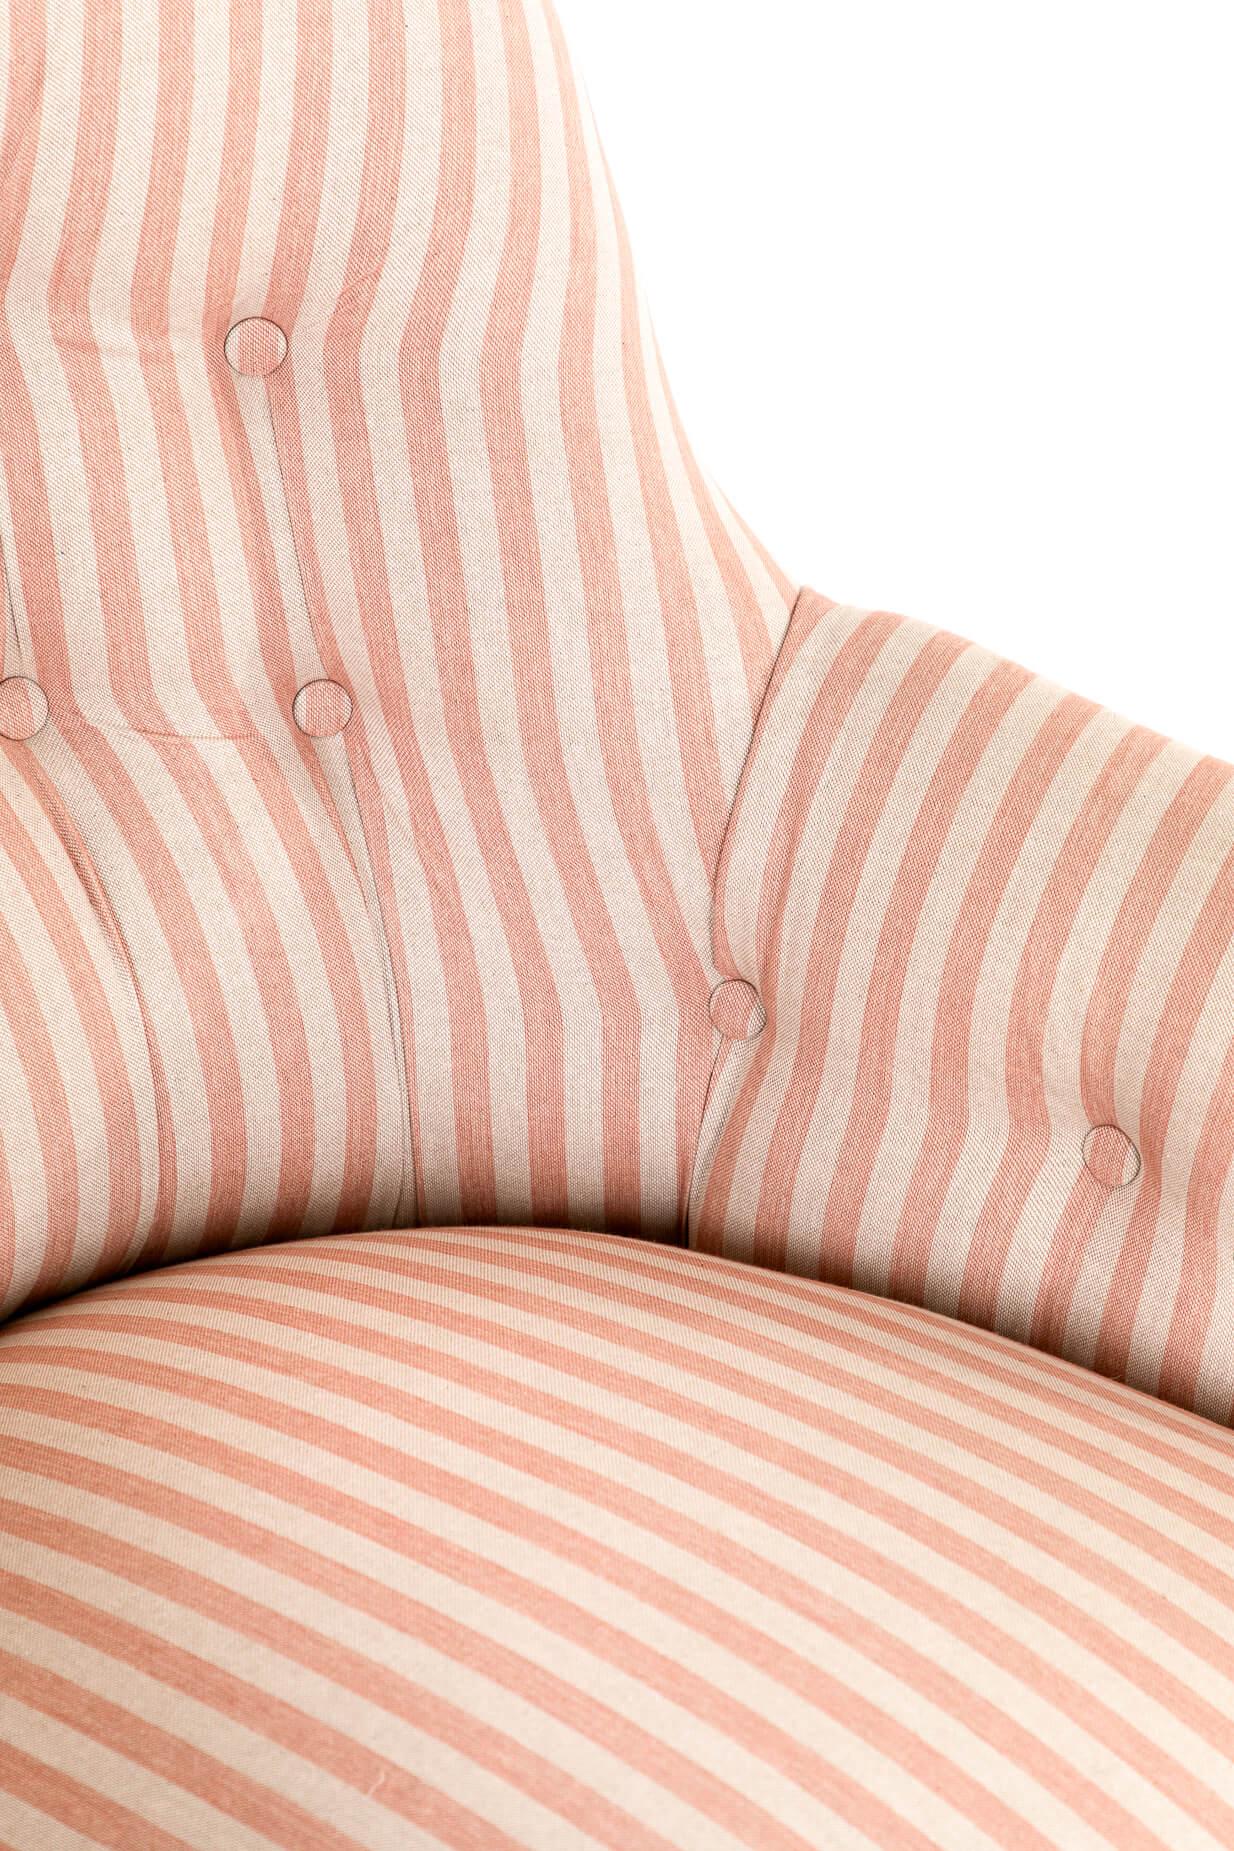 Victorian Pink Stripe Button Back Armchair For Sale 2